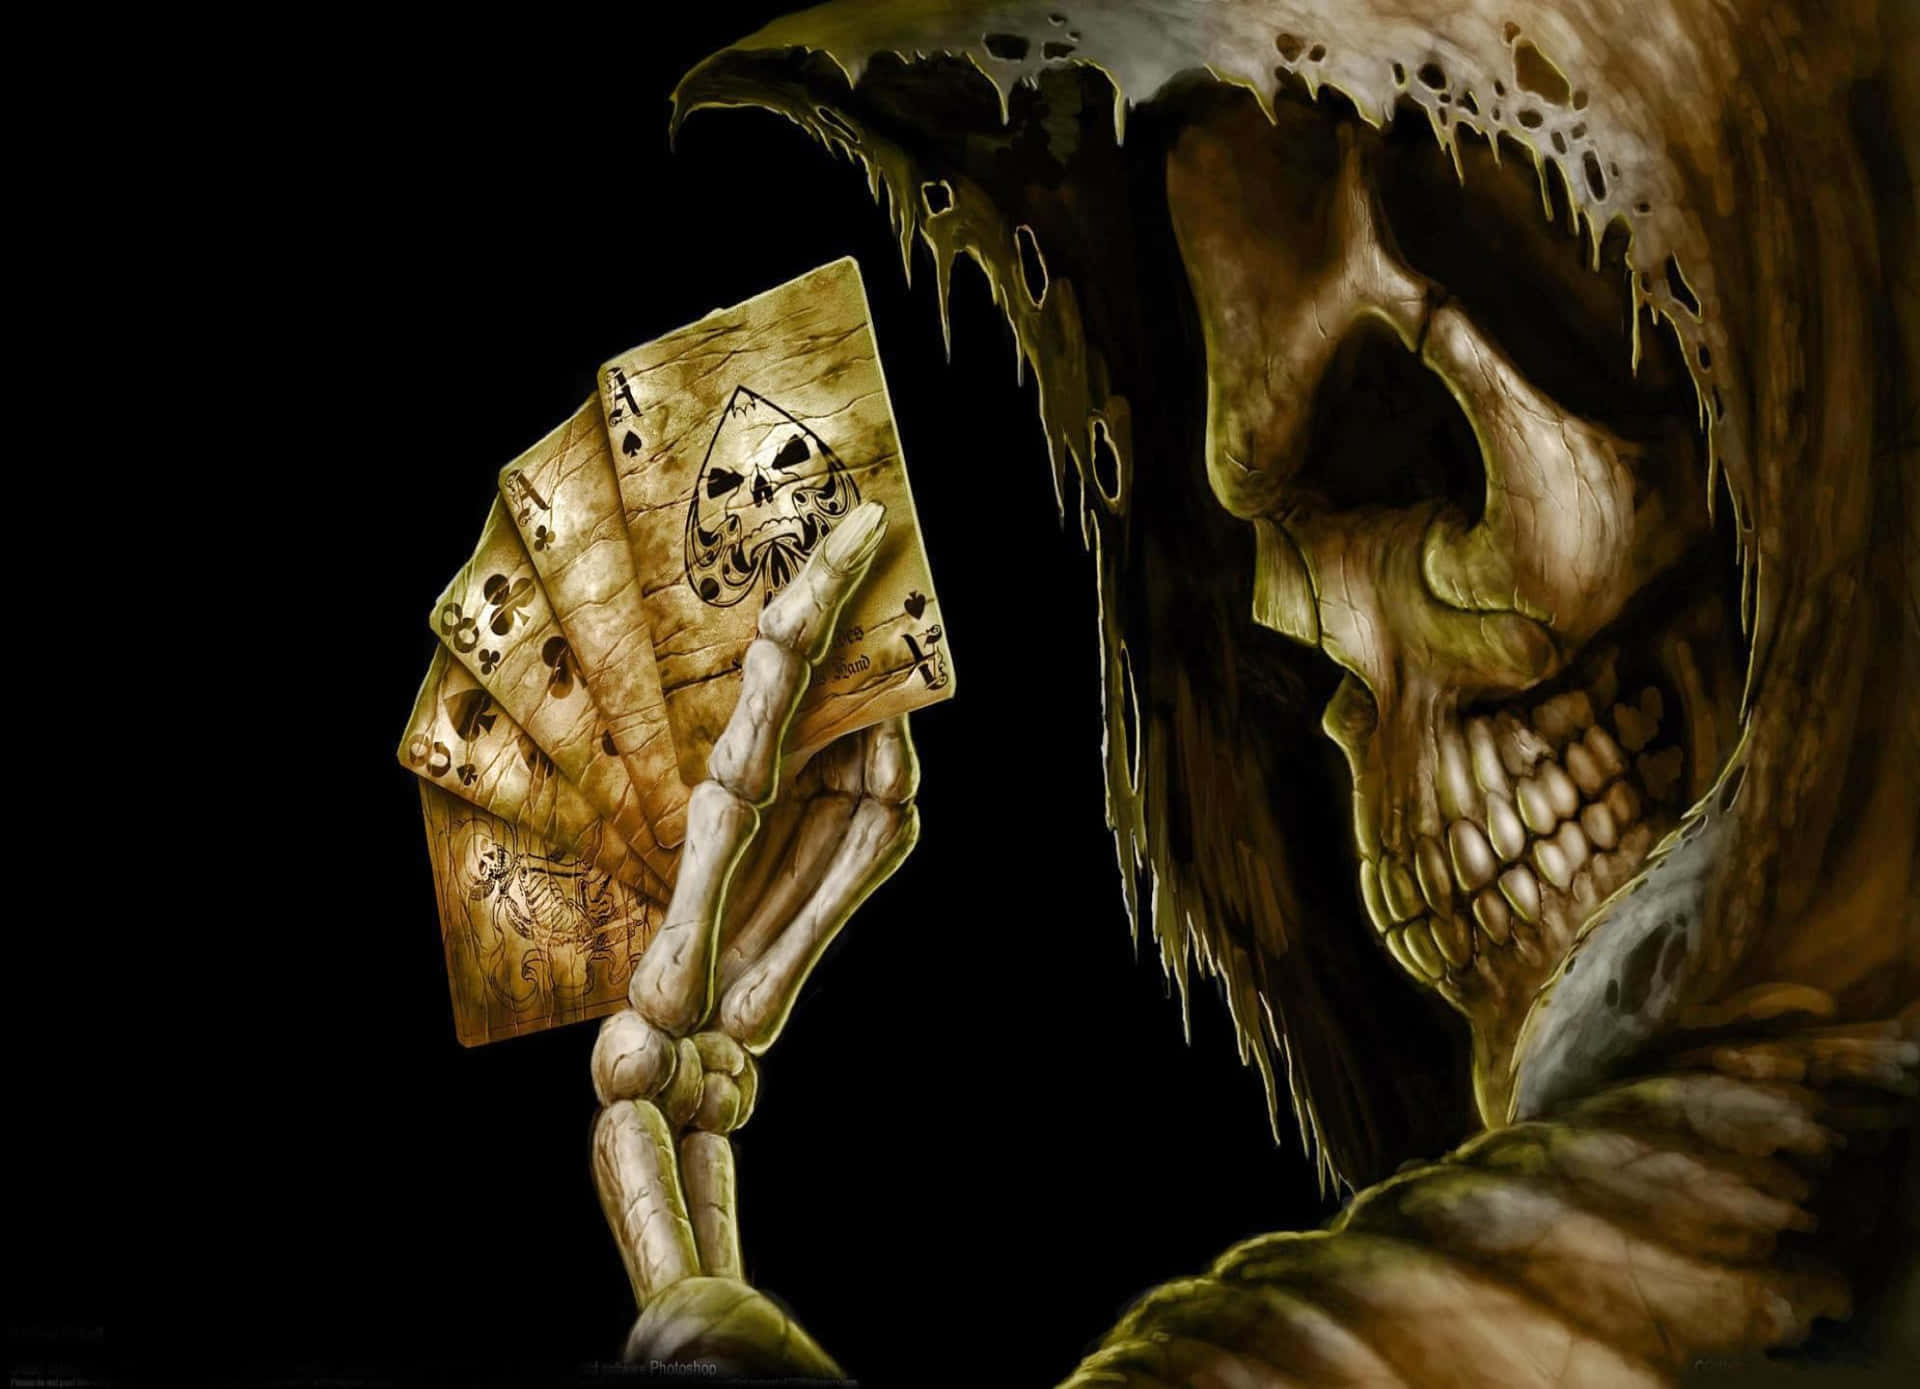 A Skeleton Holding Playing Cards